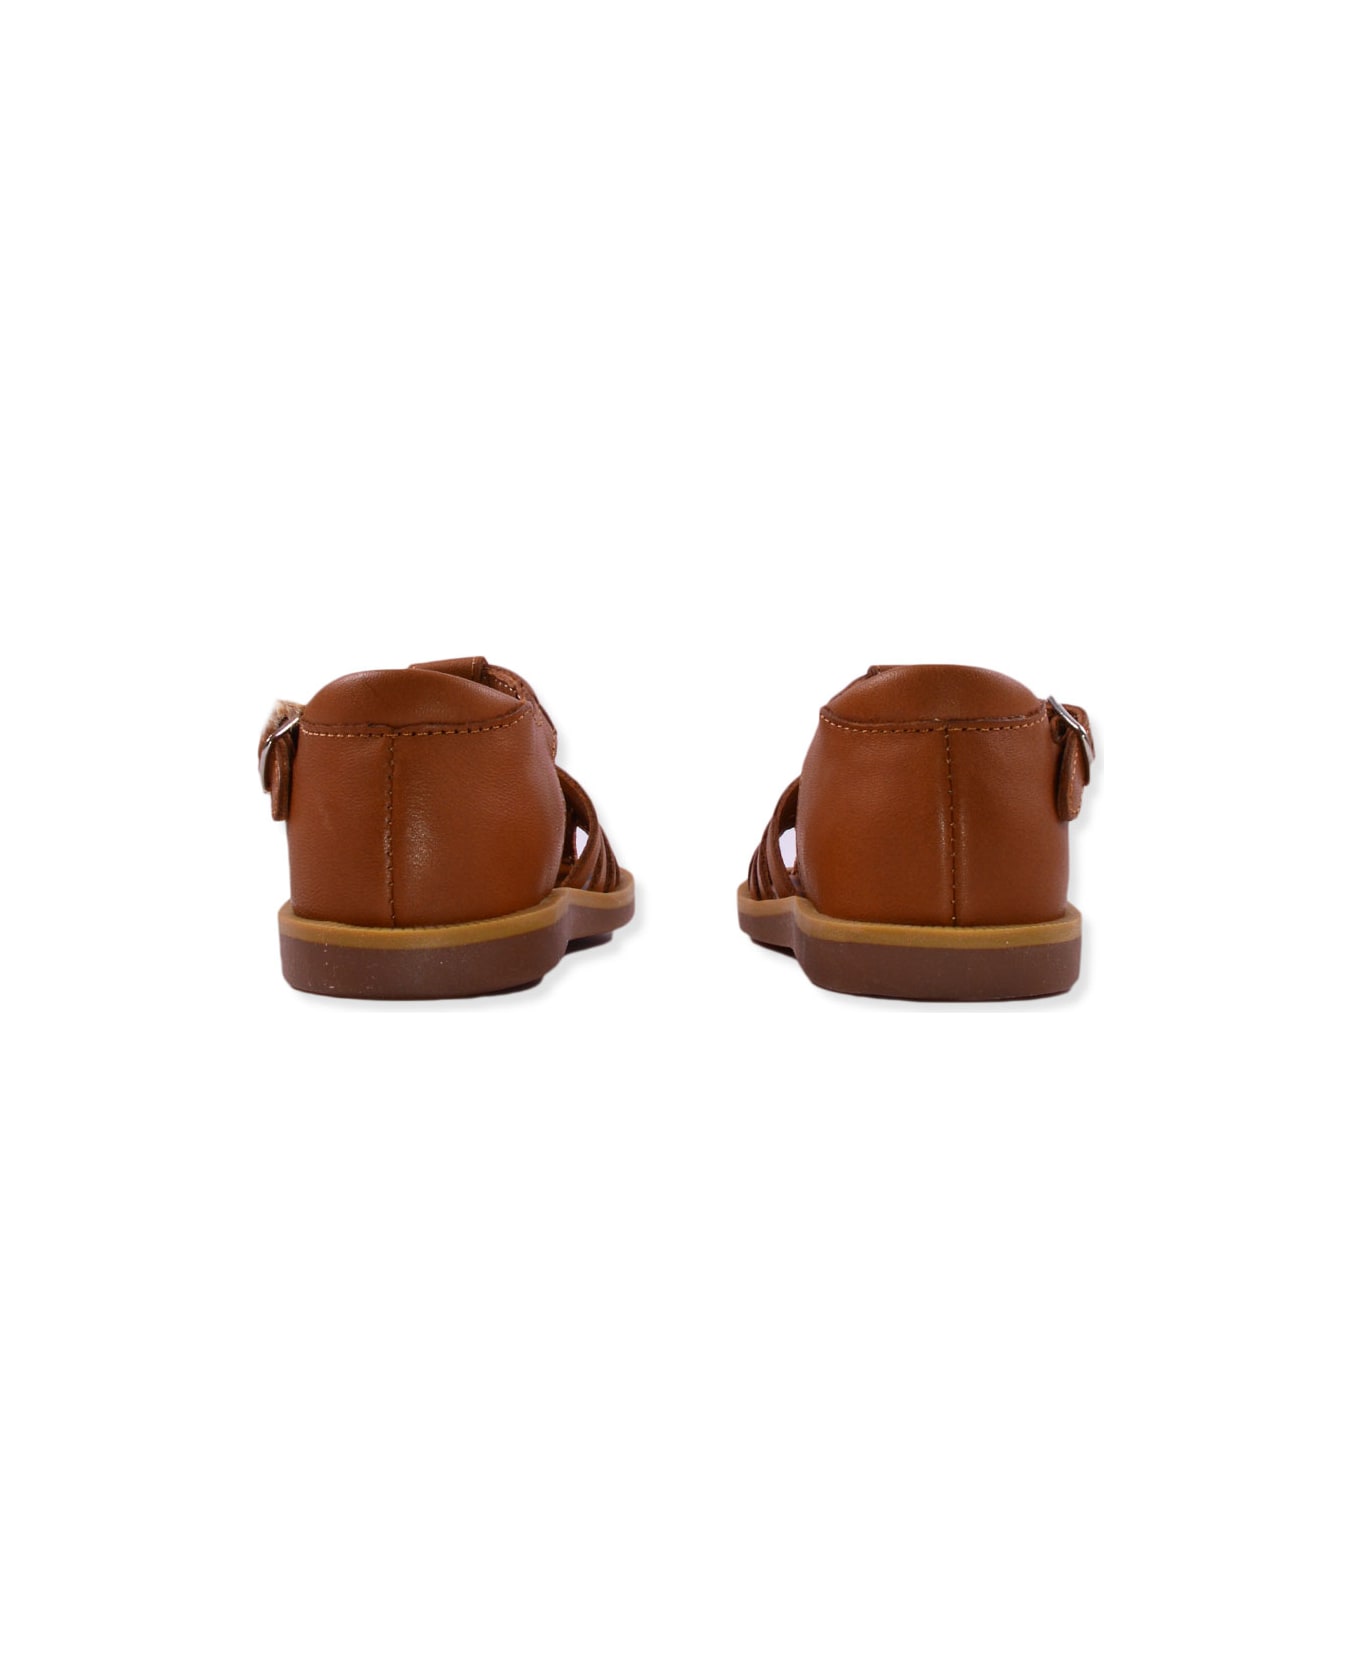 Pom d'Api Sandals In Smooth Leather - Brown シューズ